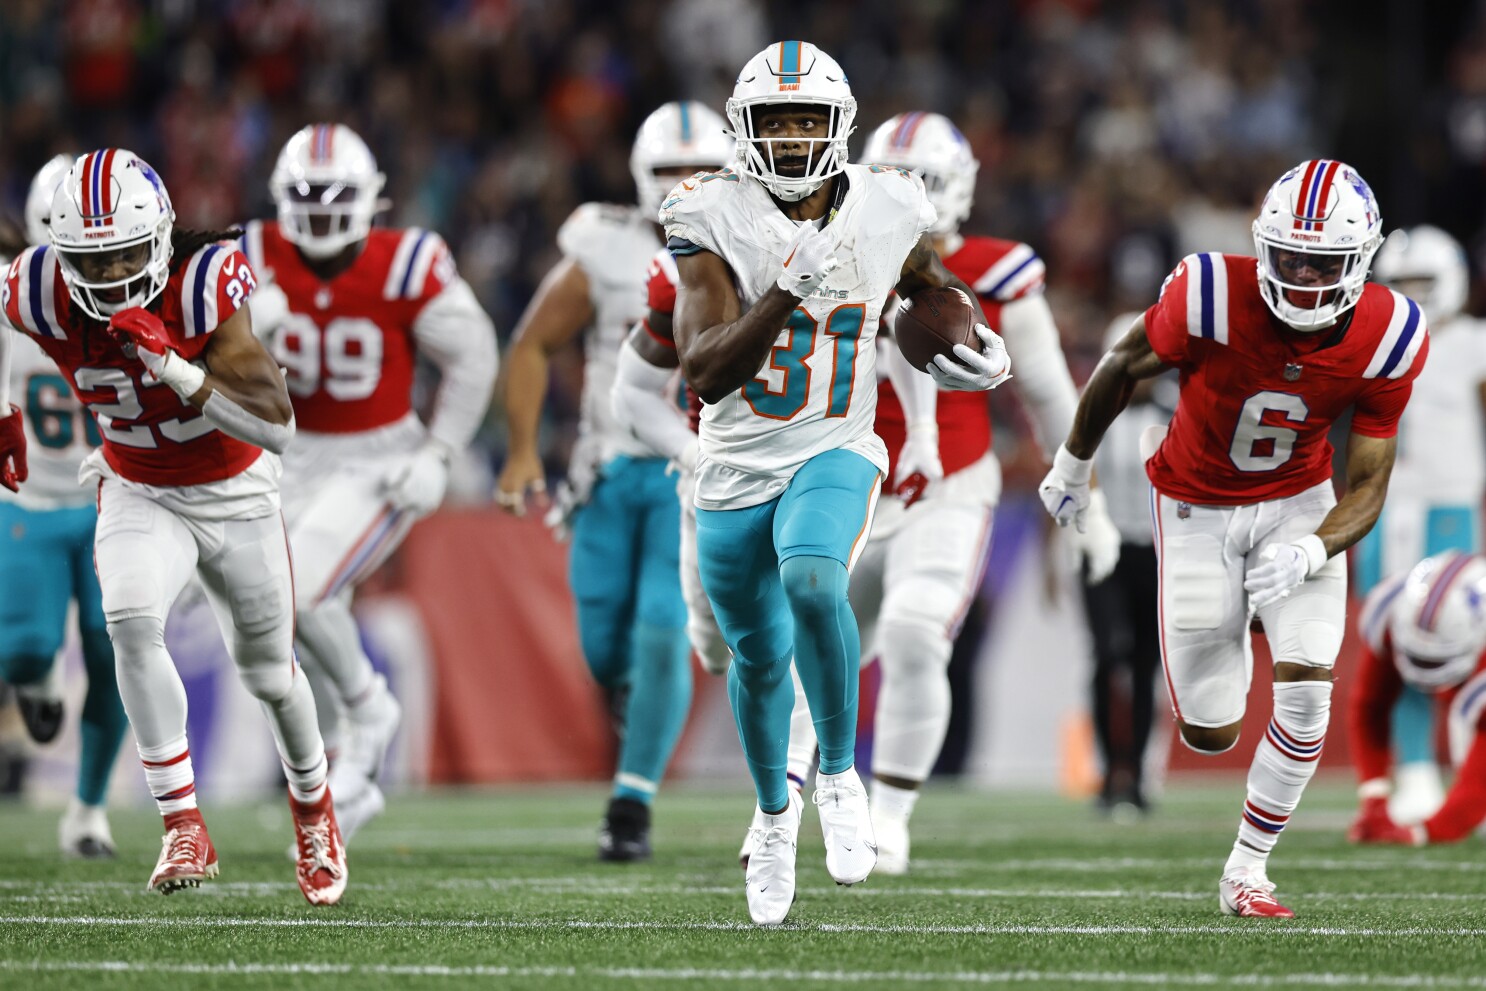 Mostert runs for 2 TDs, Tagovailoa throws for another as Dolphins hold off  Patriots 24-17